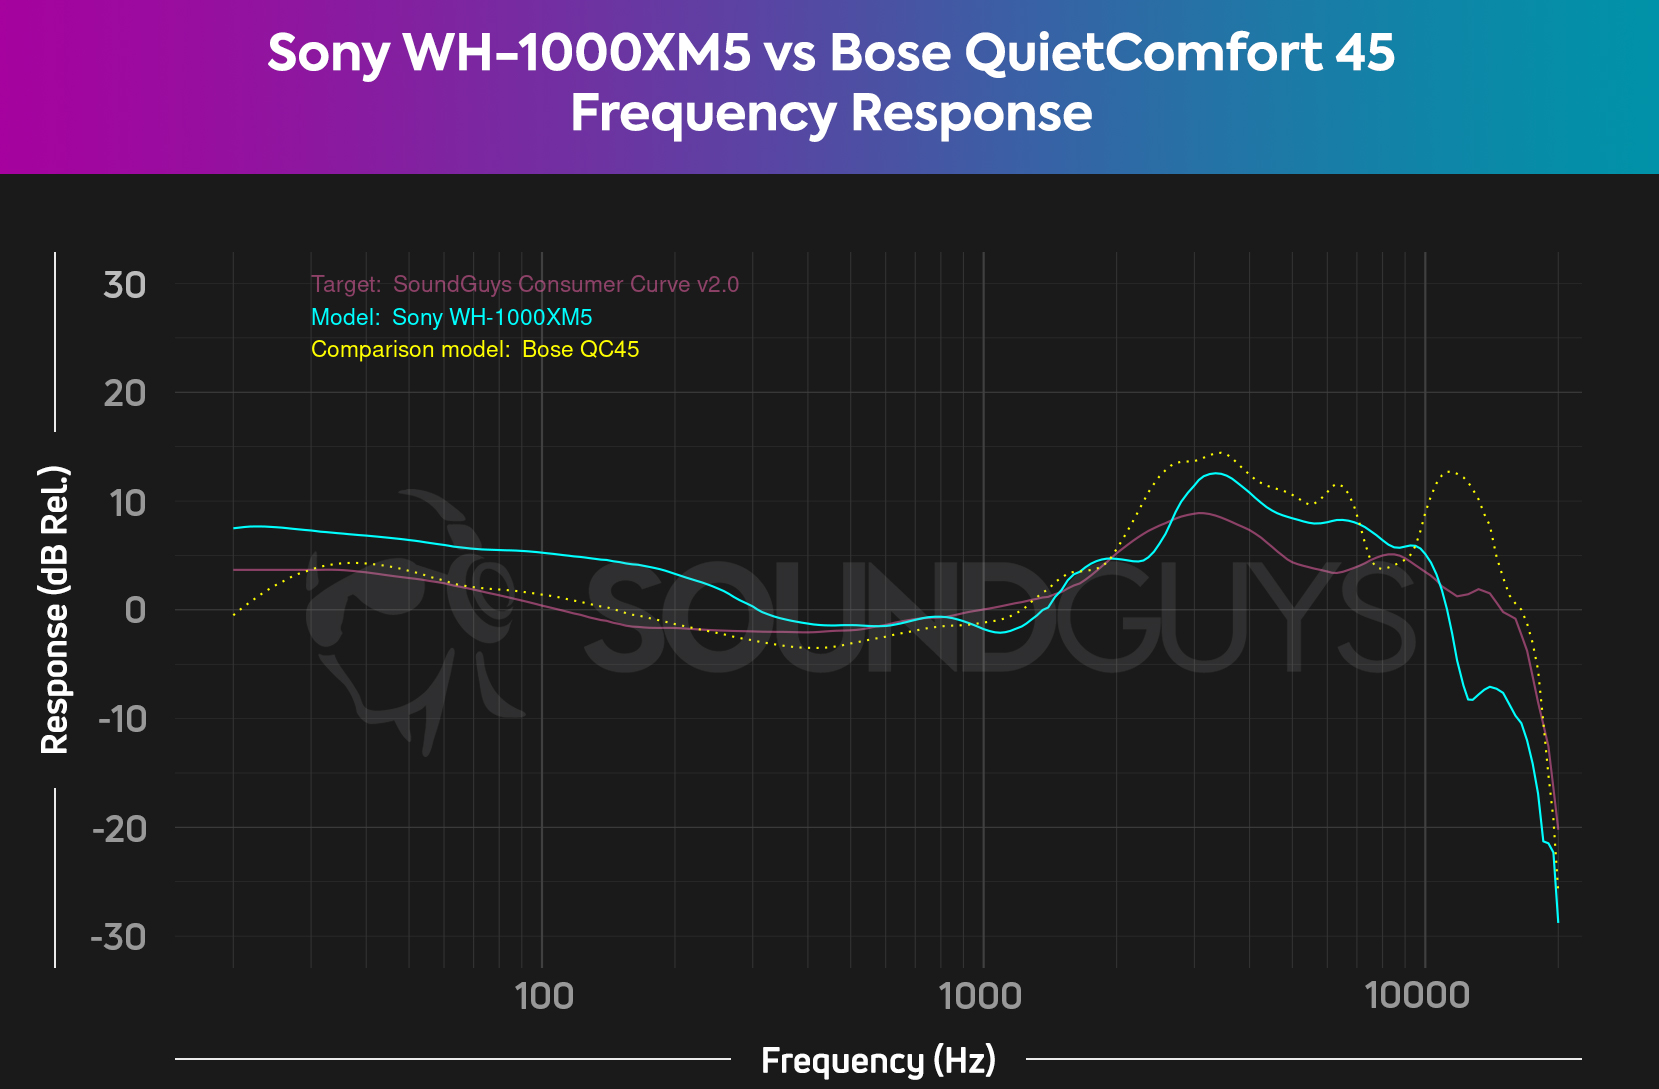 The Bose QuietComfort 45 has less objectionable bass emphasis, but a lack of higher-quality codecs may frustrate you.